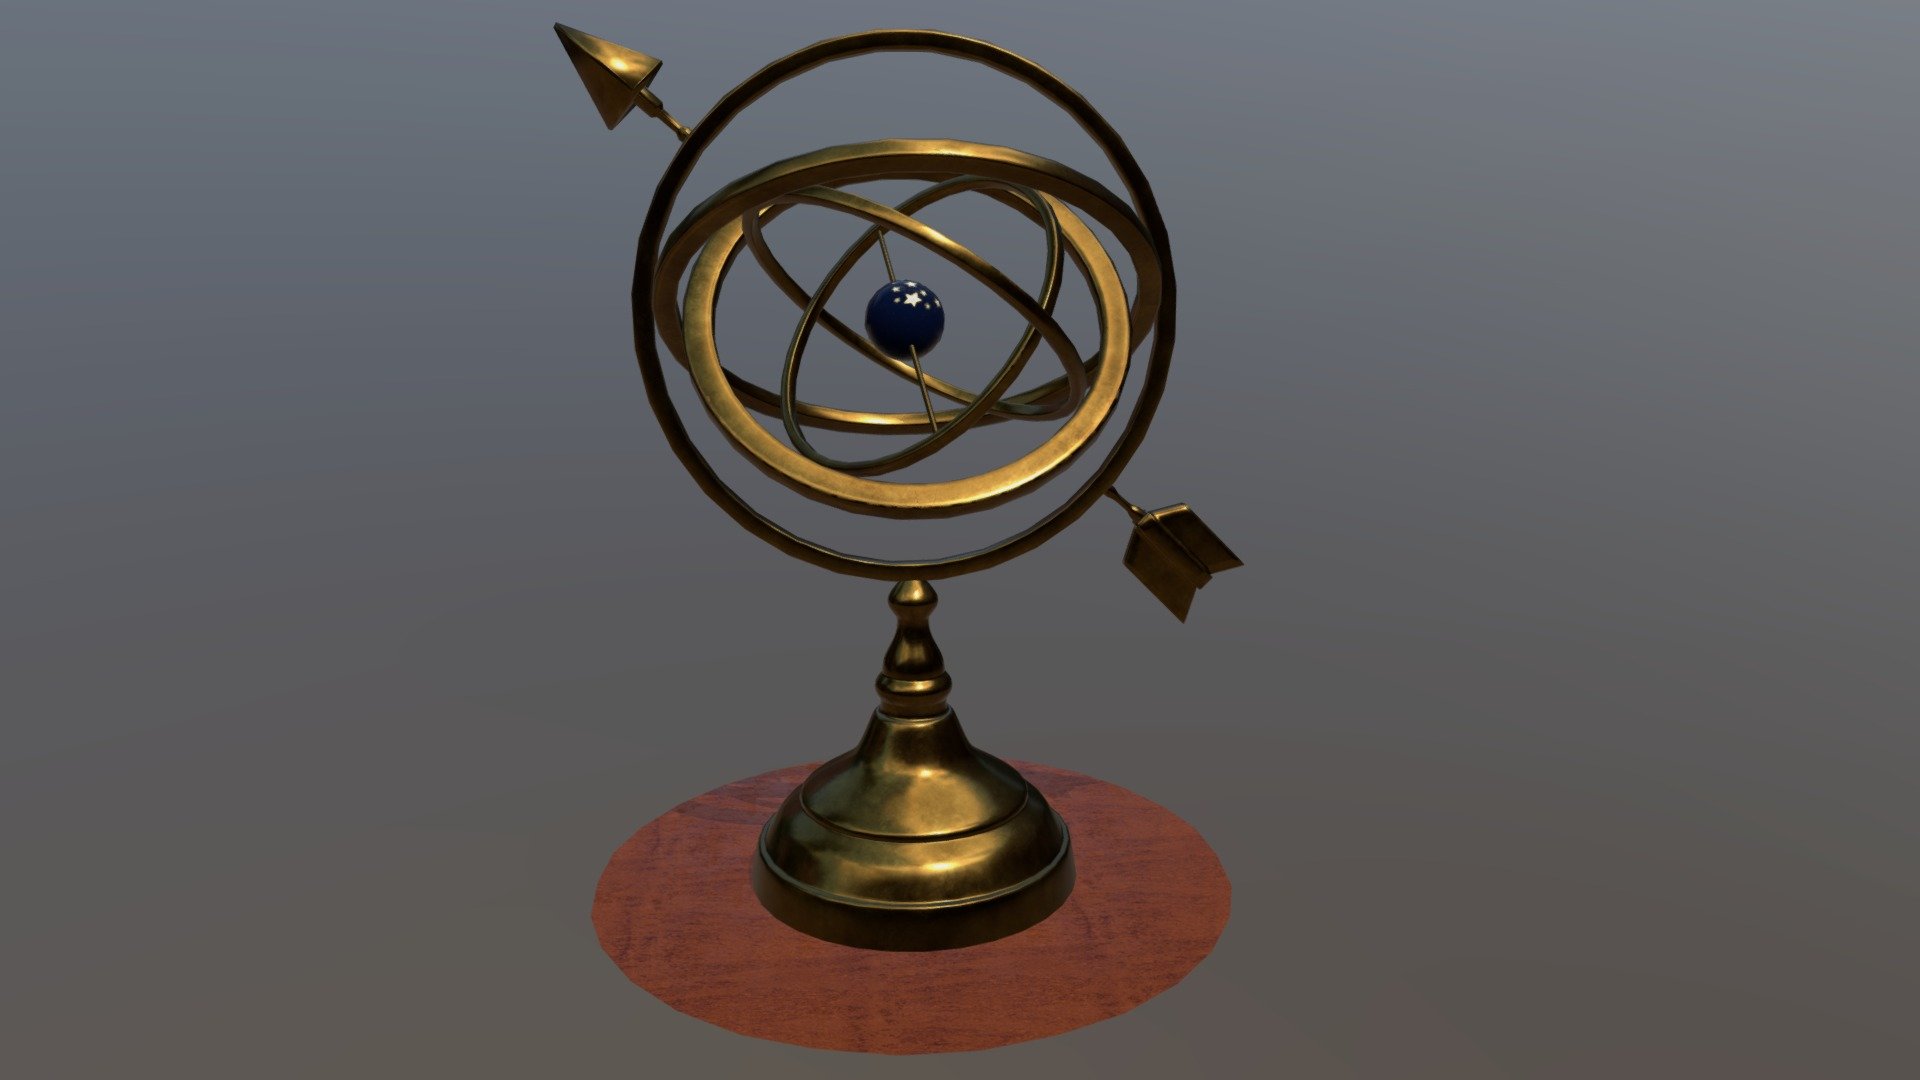 I took the old model I made of a low poly armillary sphere and made it neater. I also applied new materials that I made with Substance Designer, and painted some marks with Substance Painter 3d model